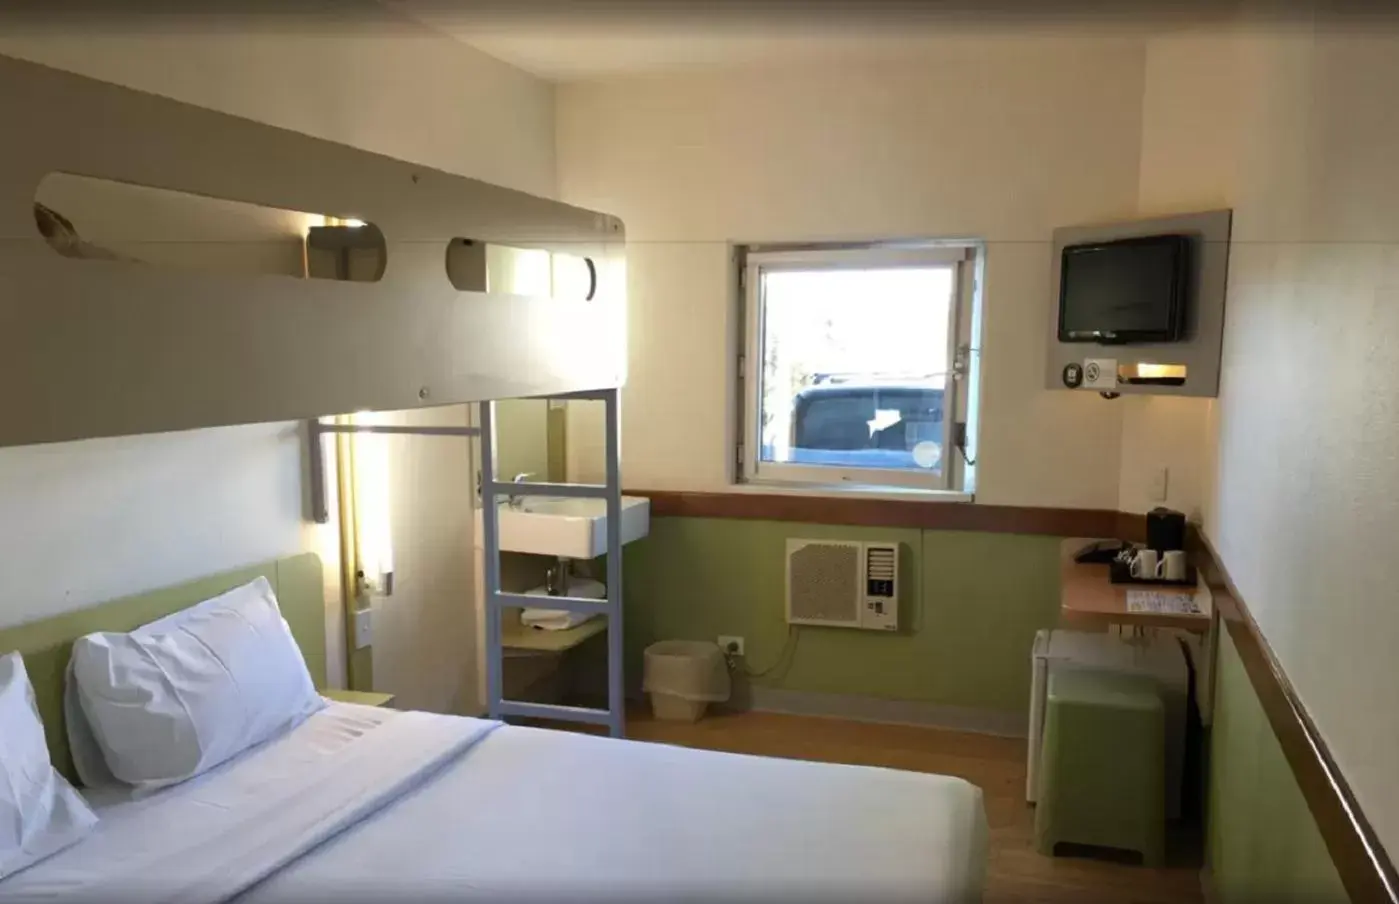 Standard King Room with a Single Overhead Bunk Bed  in ibis Budget - Campbelltown